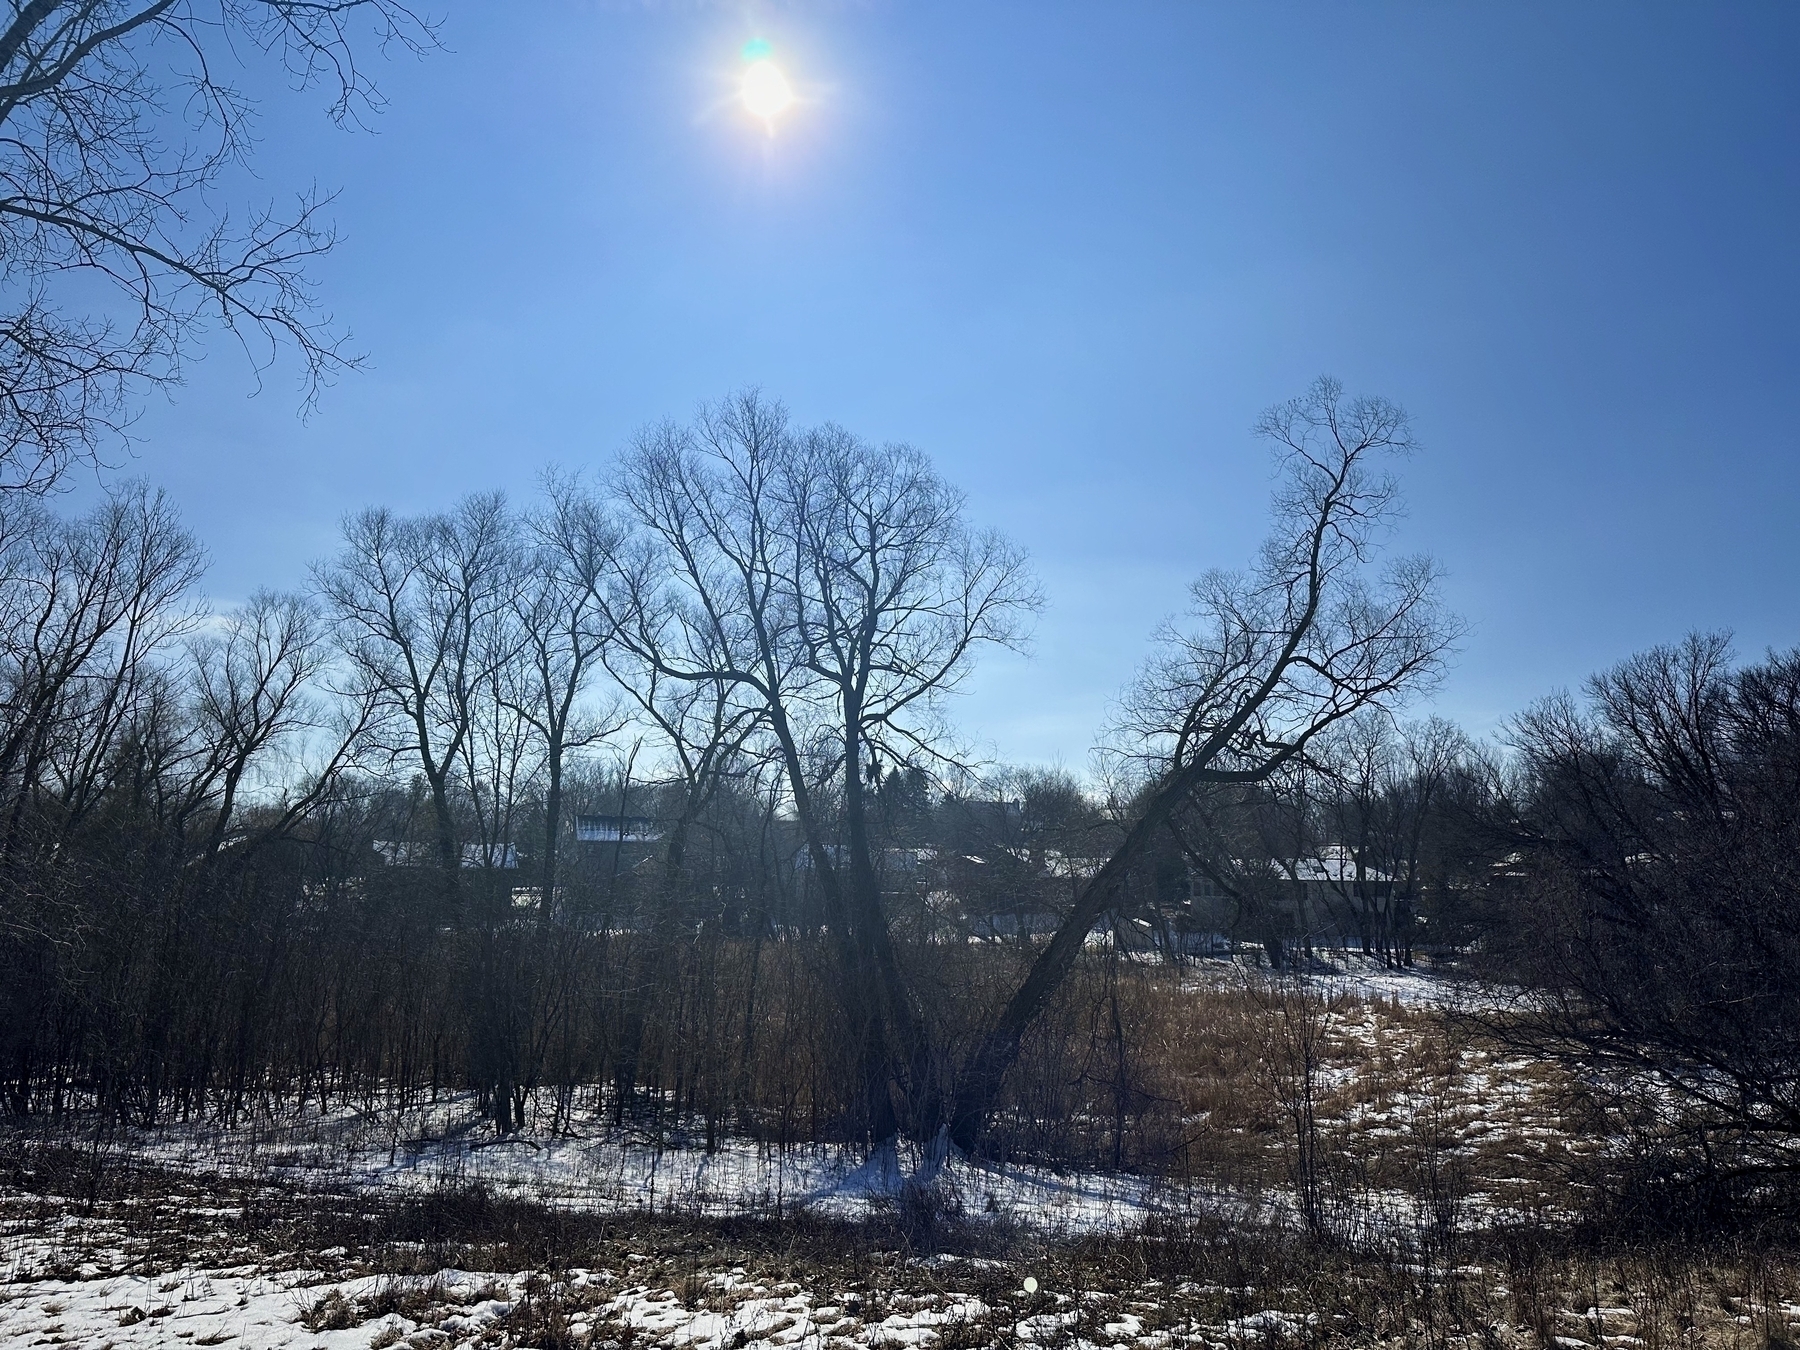 Leafless trees stand under a bright sun in a snowy landscape, hinting at early spring.